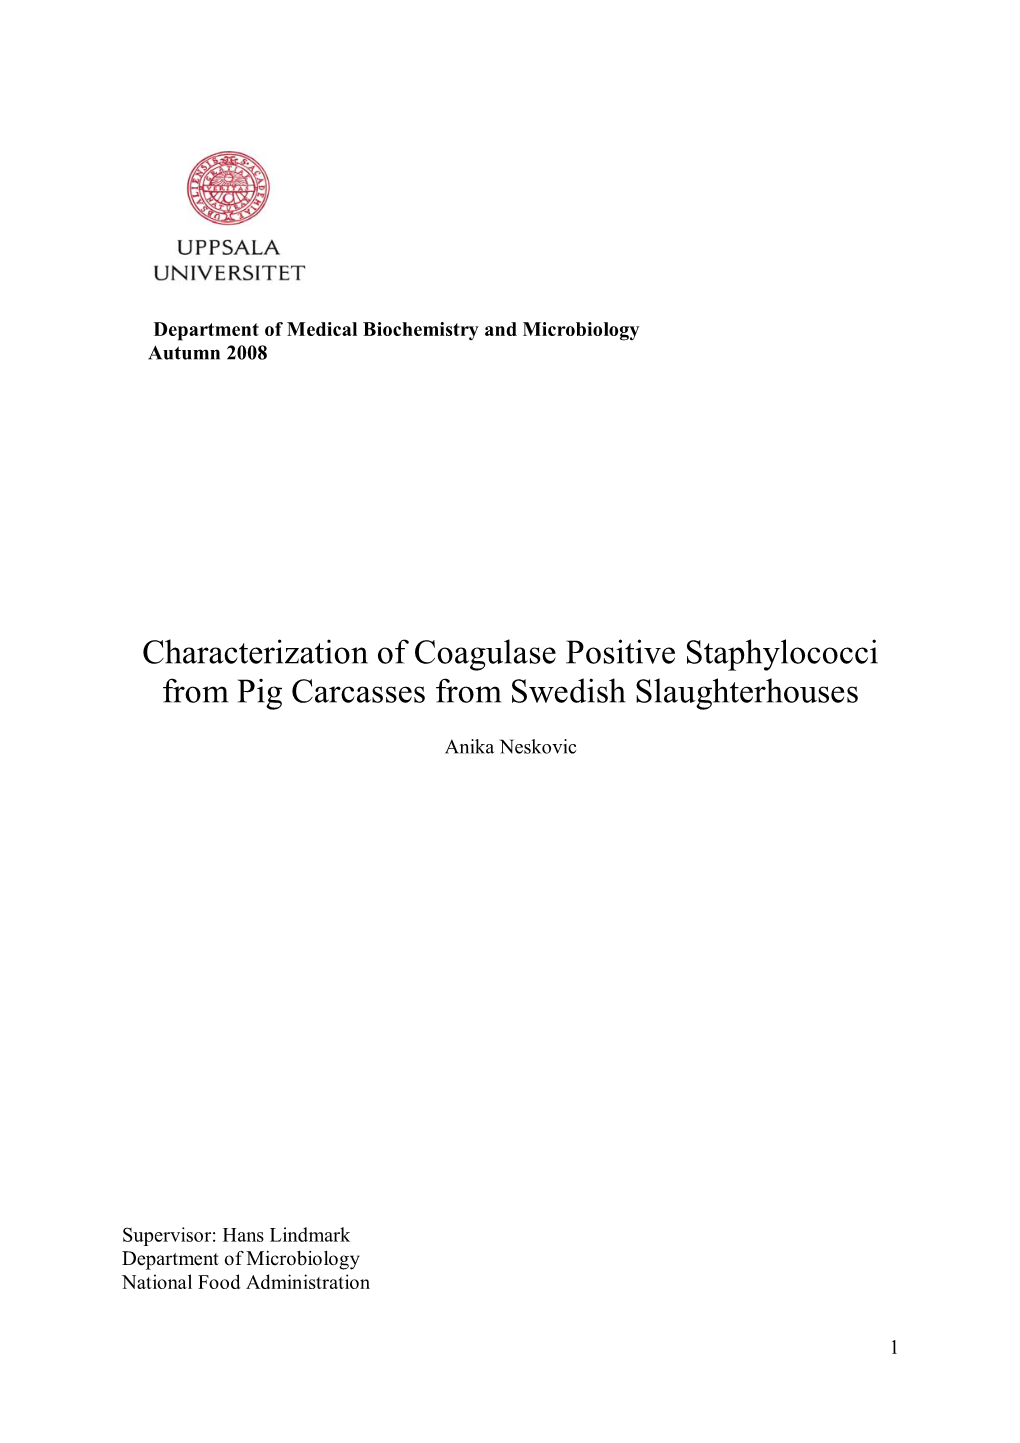 Characterization of Coagulase Positive Staphylococci from Pig Carcasses from Swedish Slaughterhouses